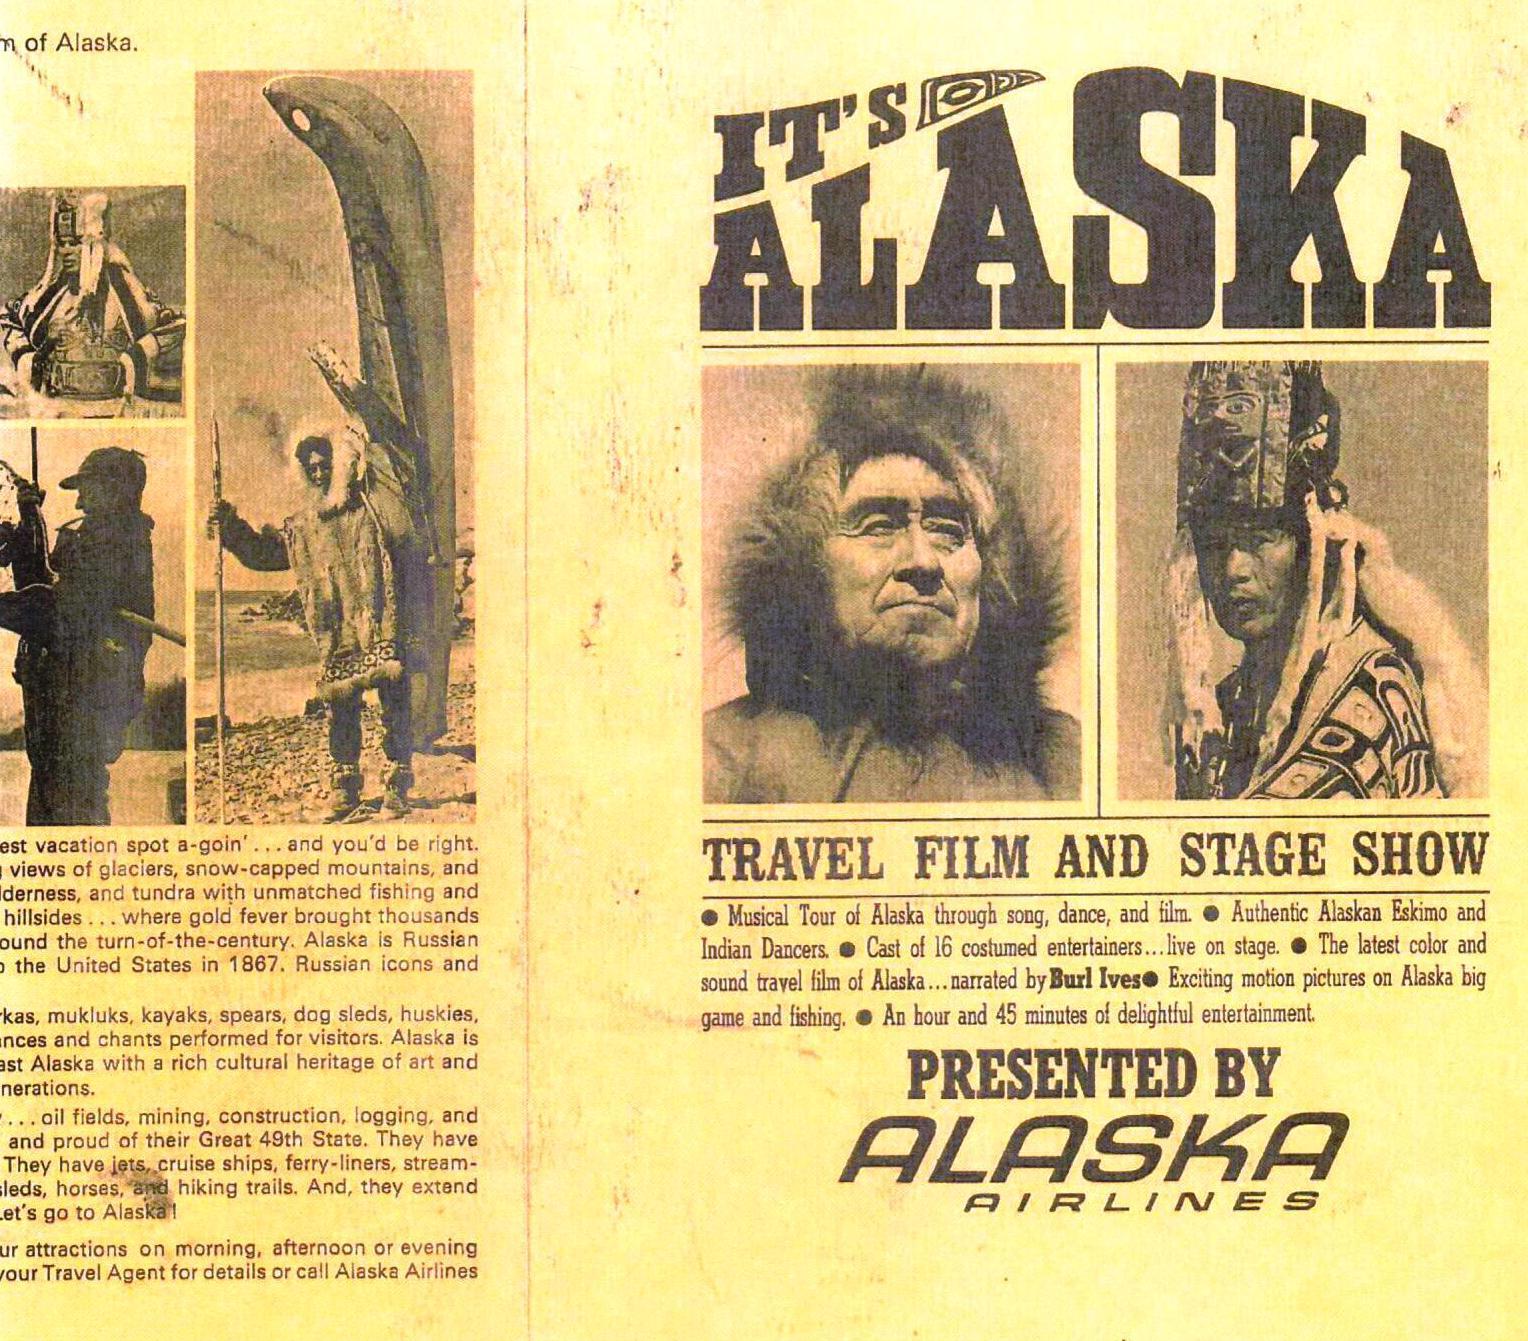 Alaska Airlines Old Logo - The story of the Eskimo: Who is on the tail of Alaska Airlines ...